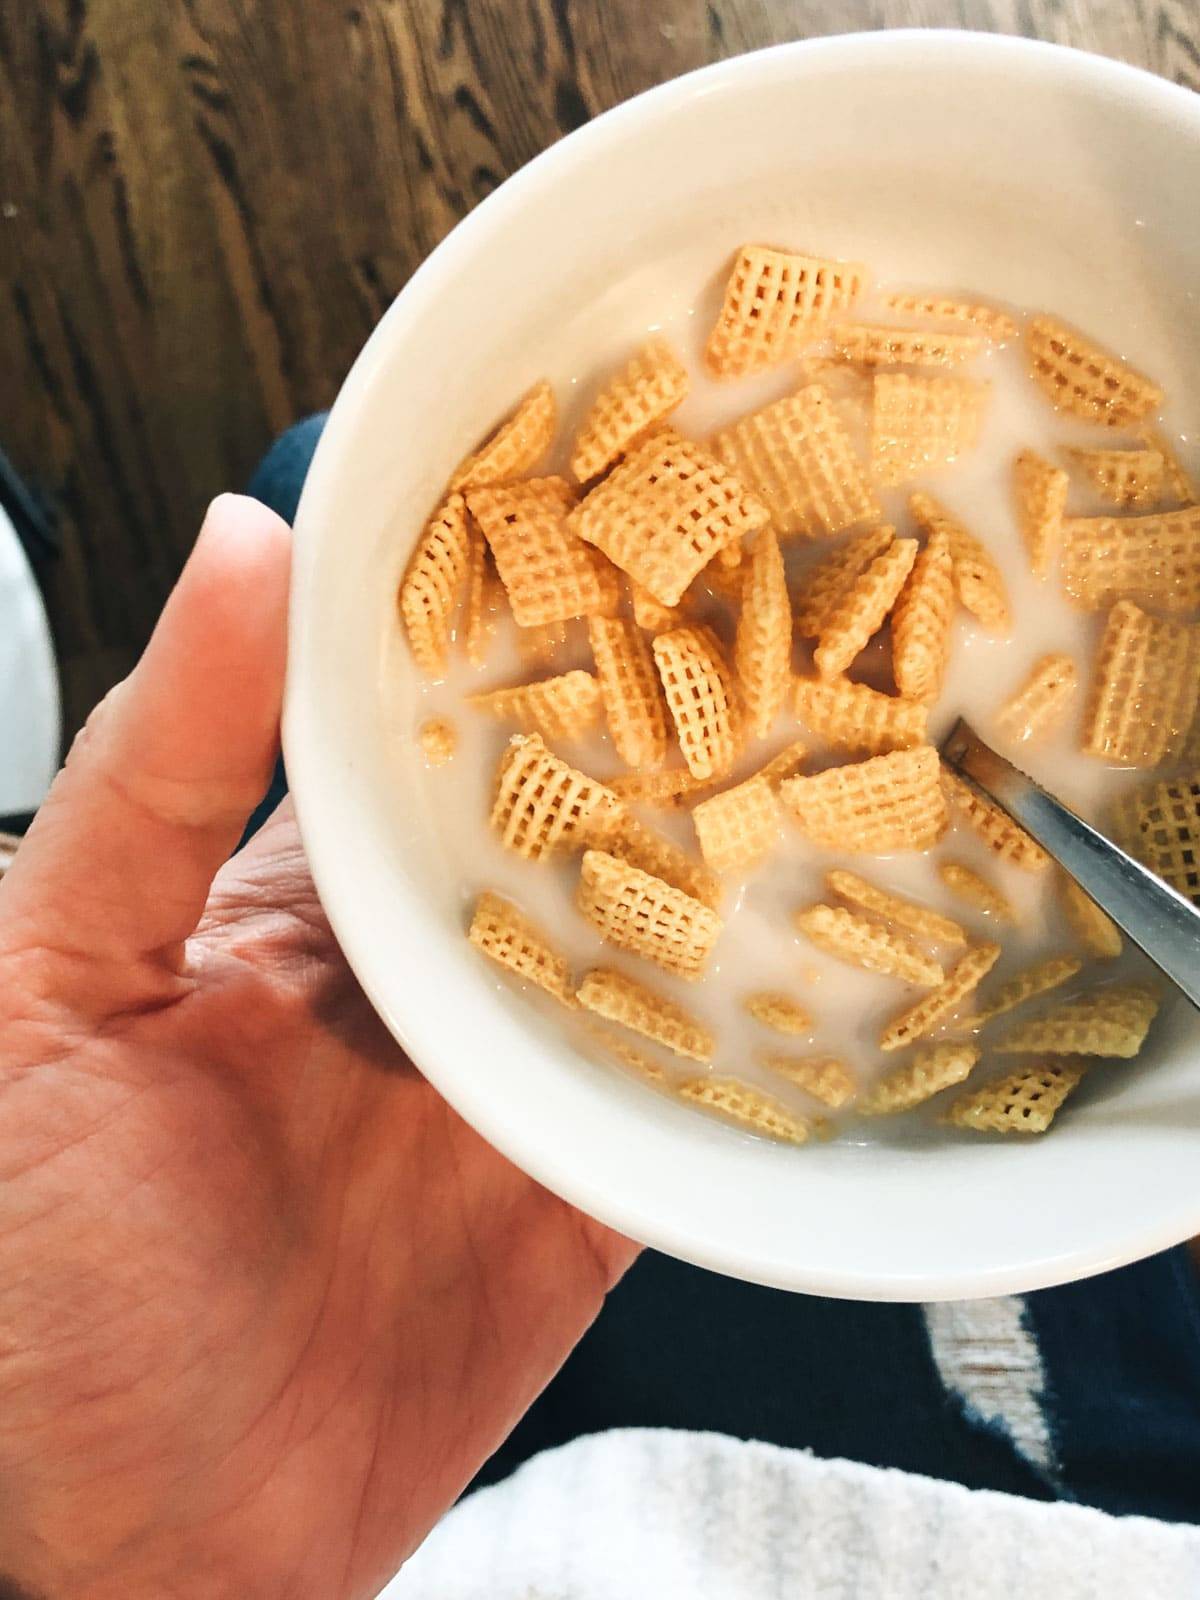 Cereal and milk in a bowl.